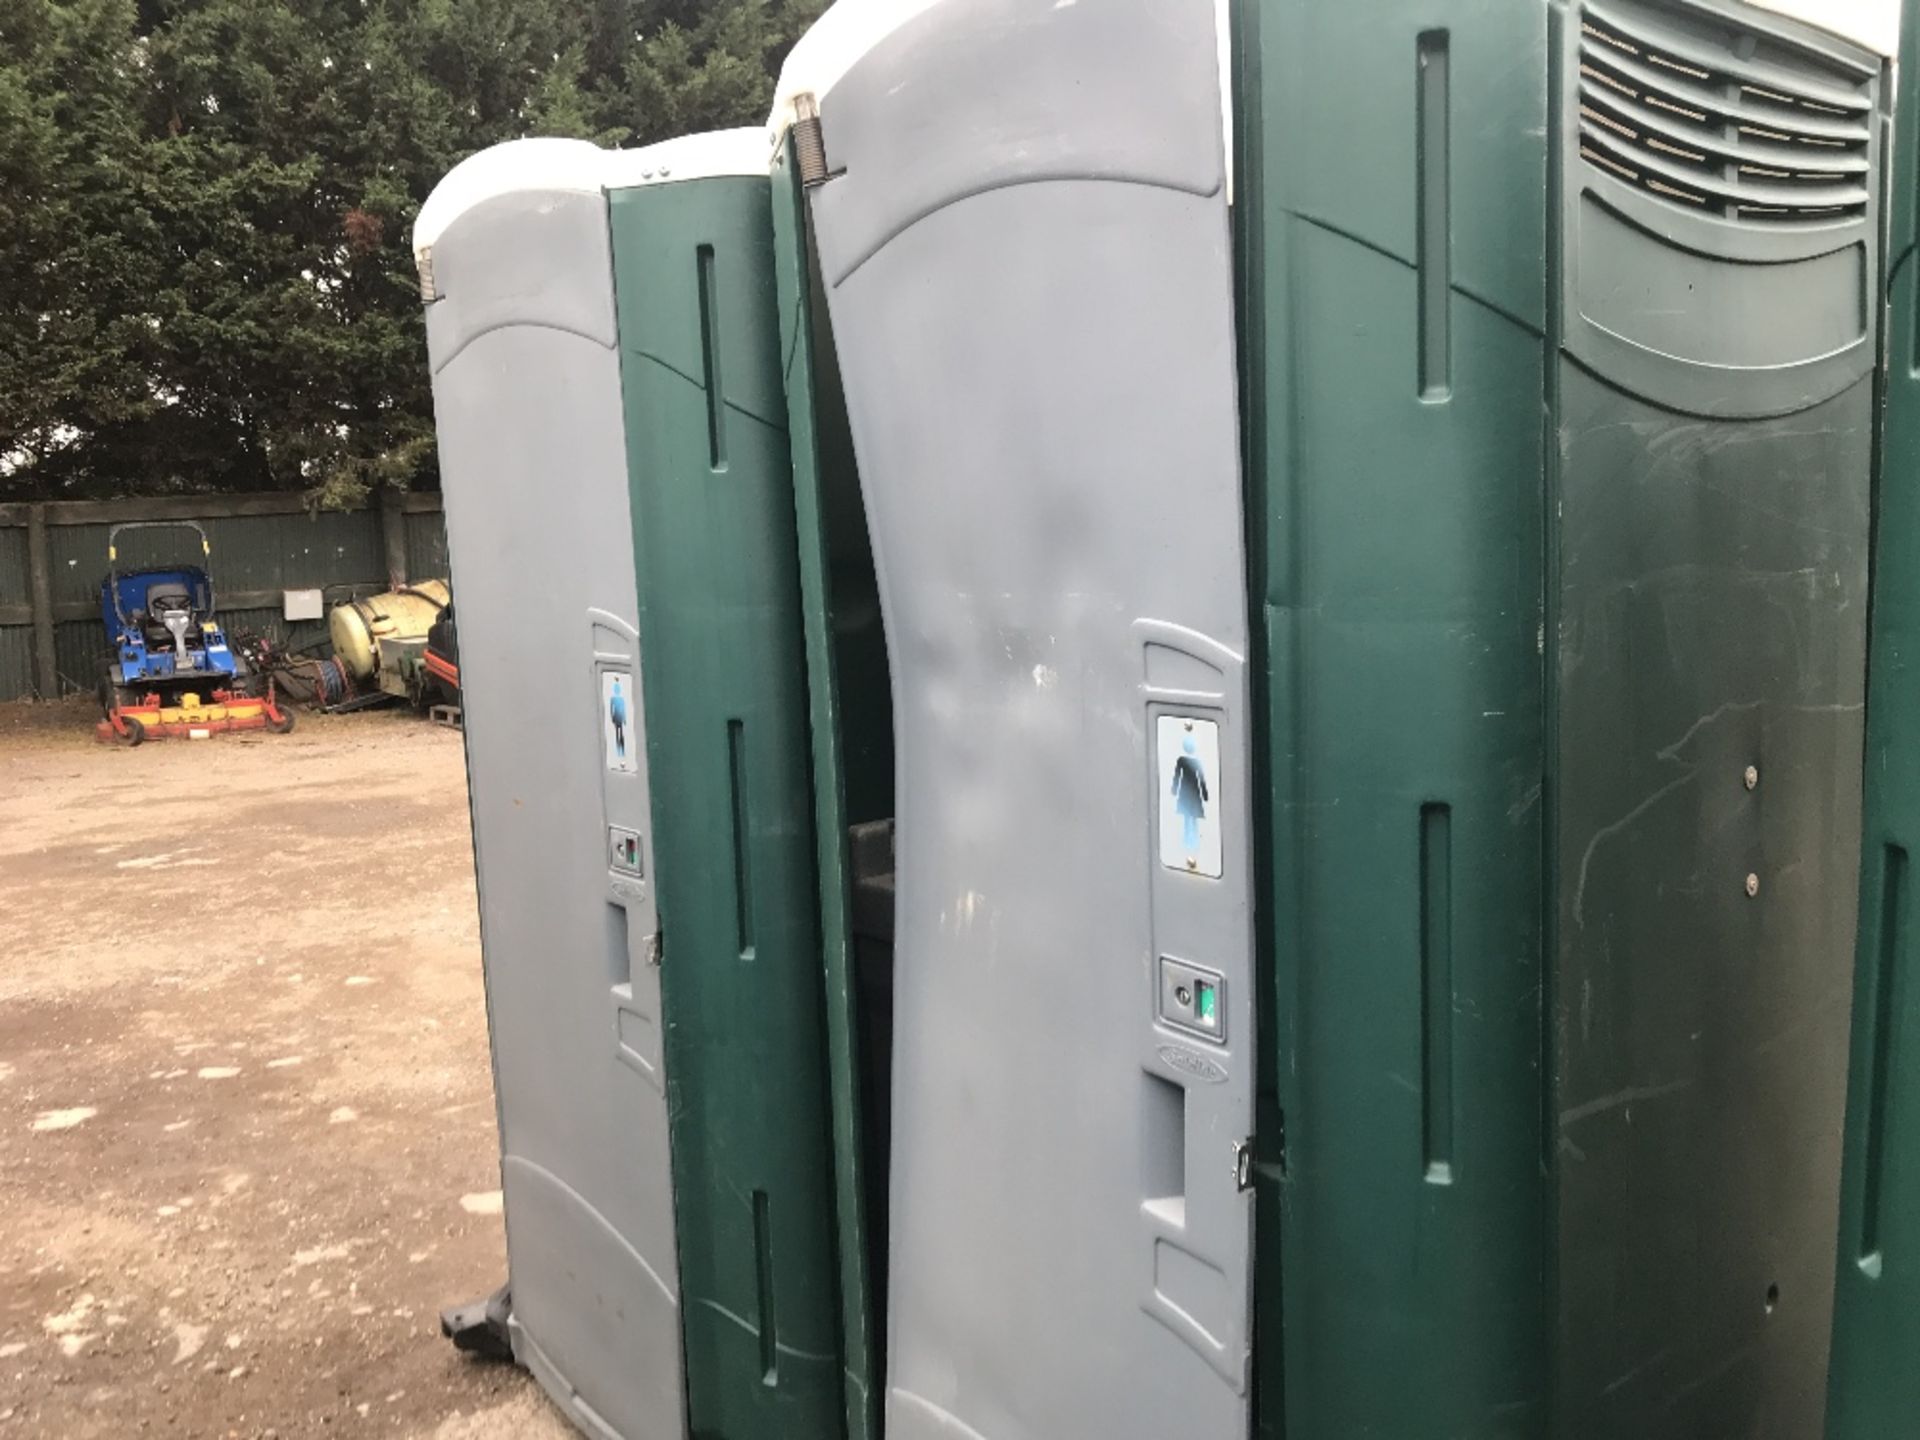 3 X GREEN PORTABLE TOILETS, ONE DOOR NEEDS ATTENTION...NB: 3 TOILETS SOLD AS ONE LOT - Image 5 of 6